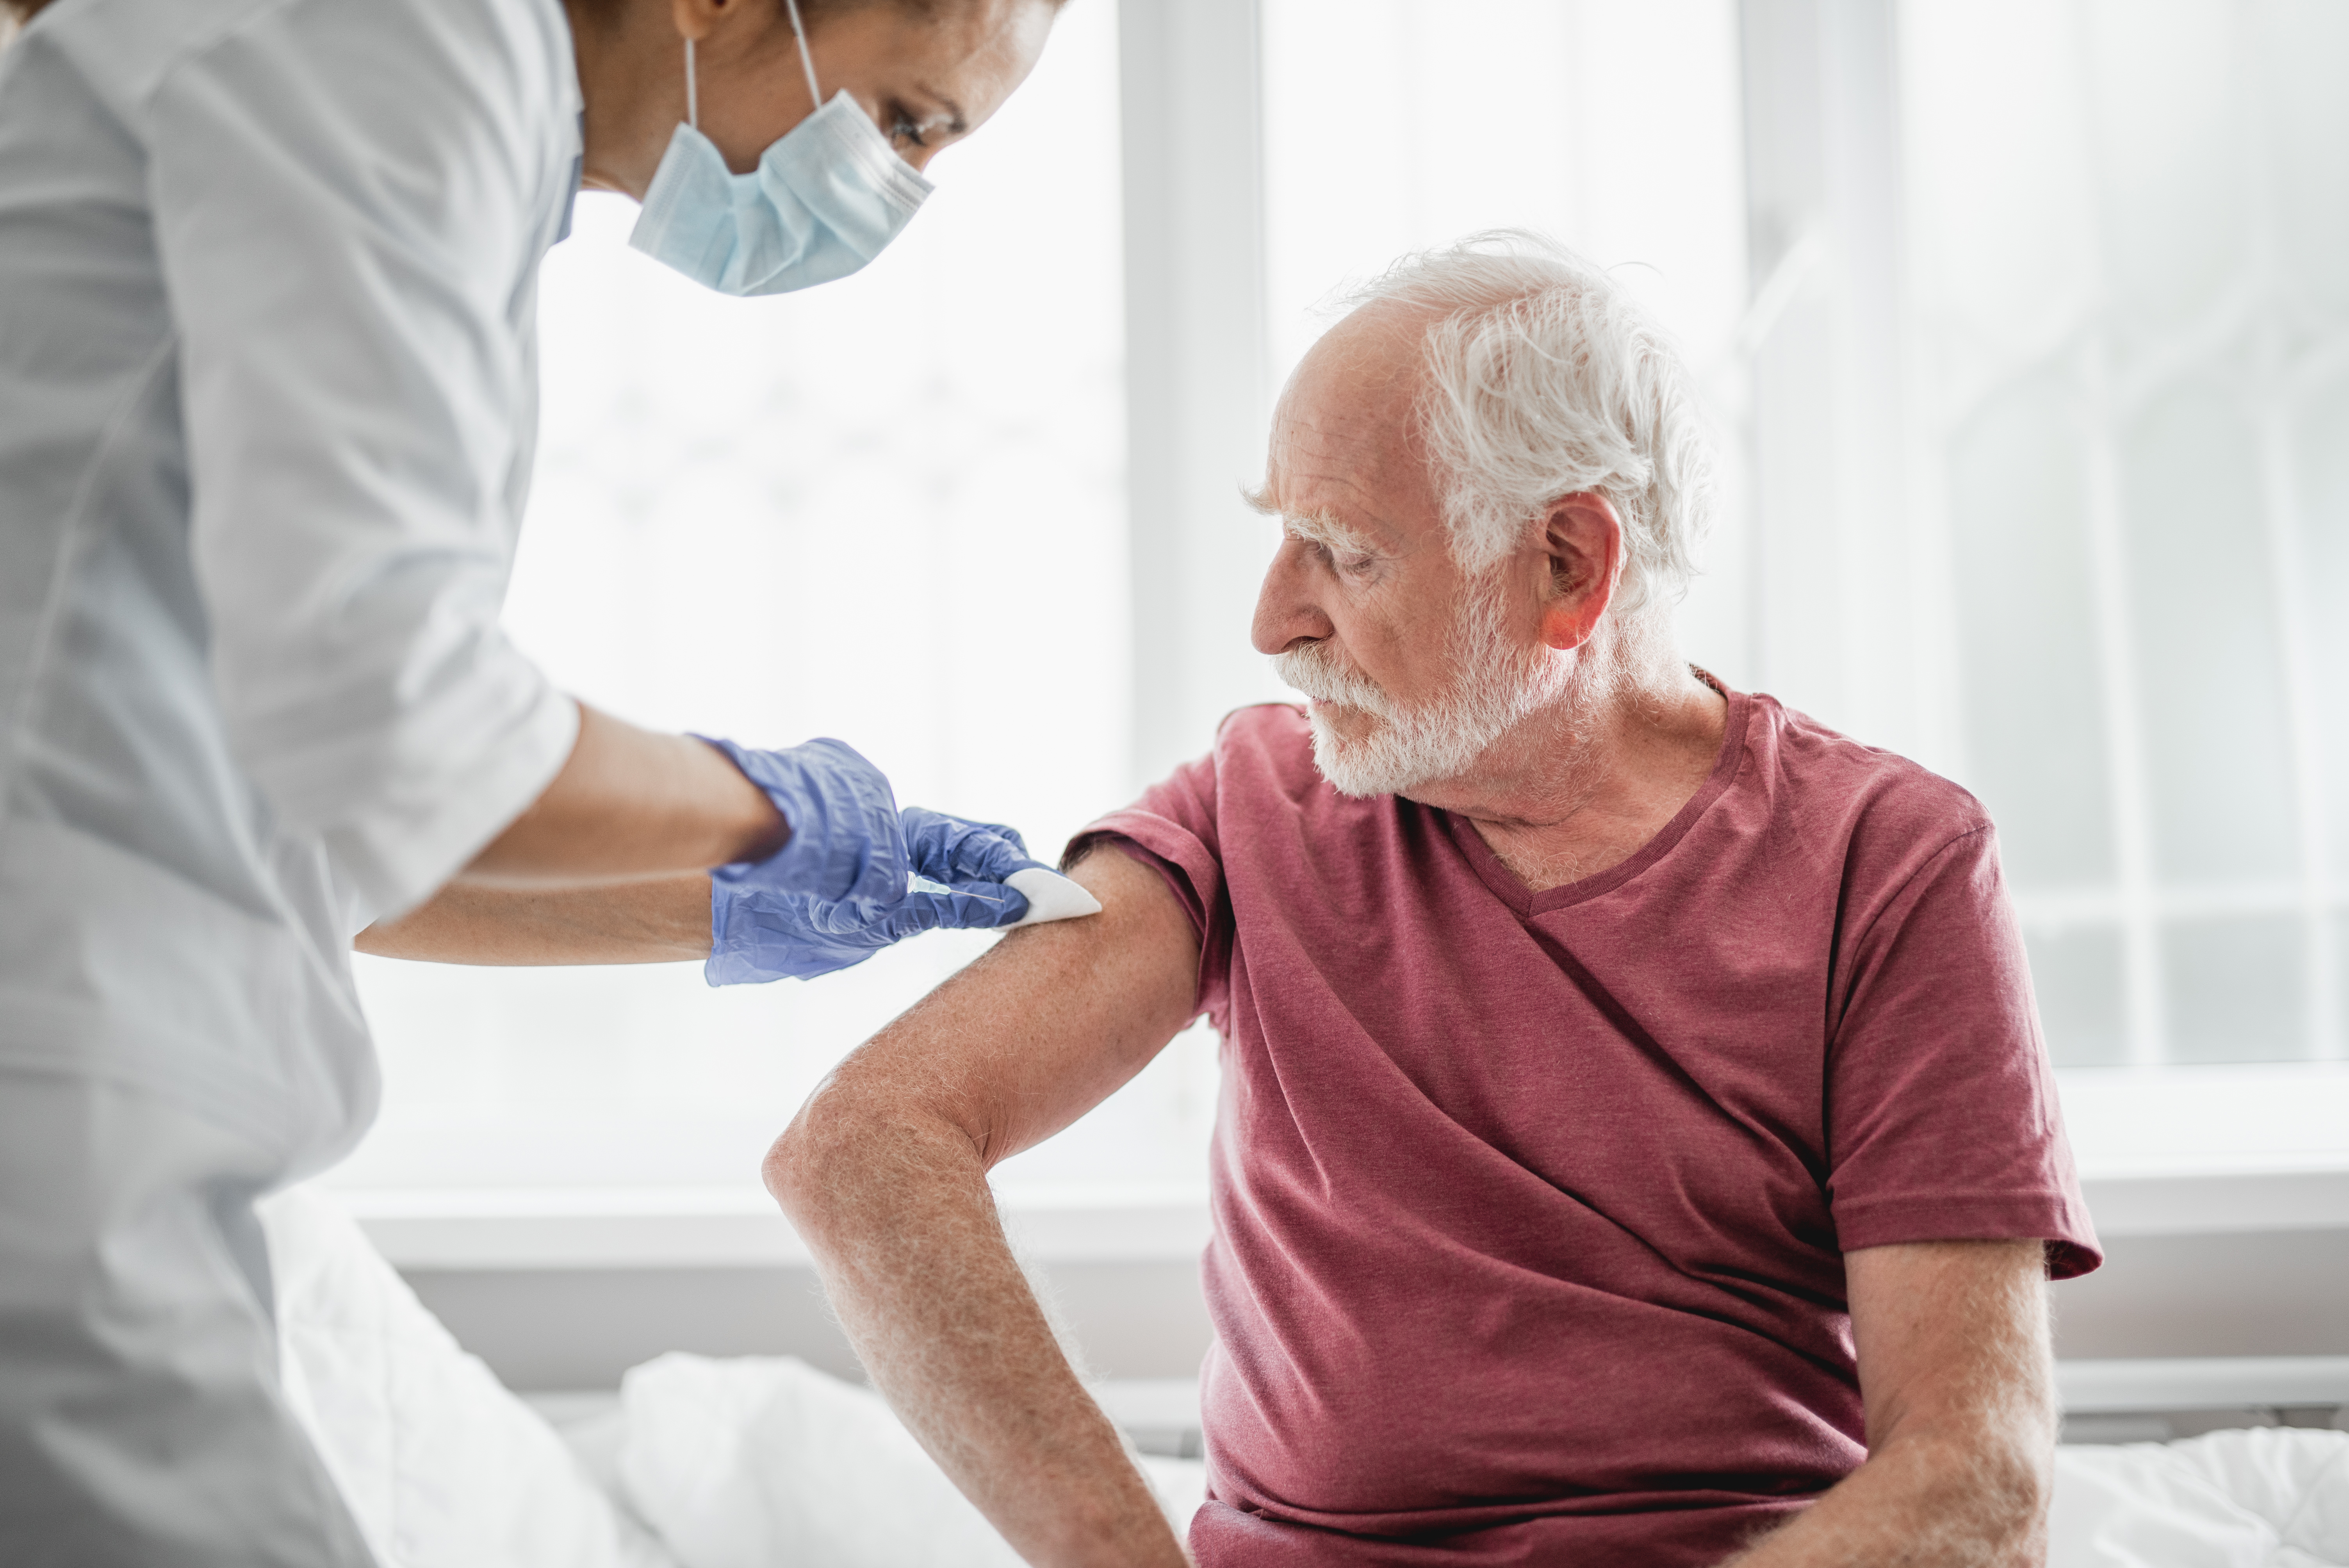 Image of health care worker preparing an older male patient's arm for vaccination.